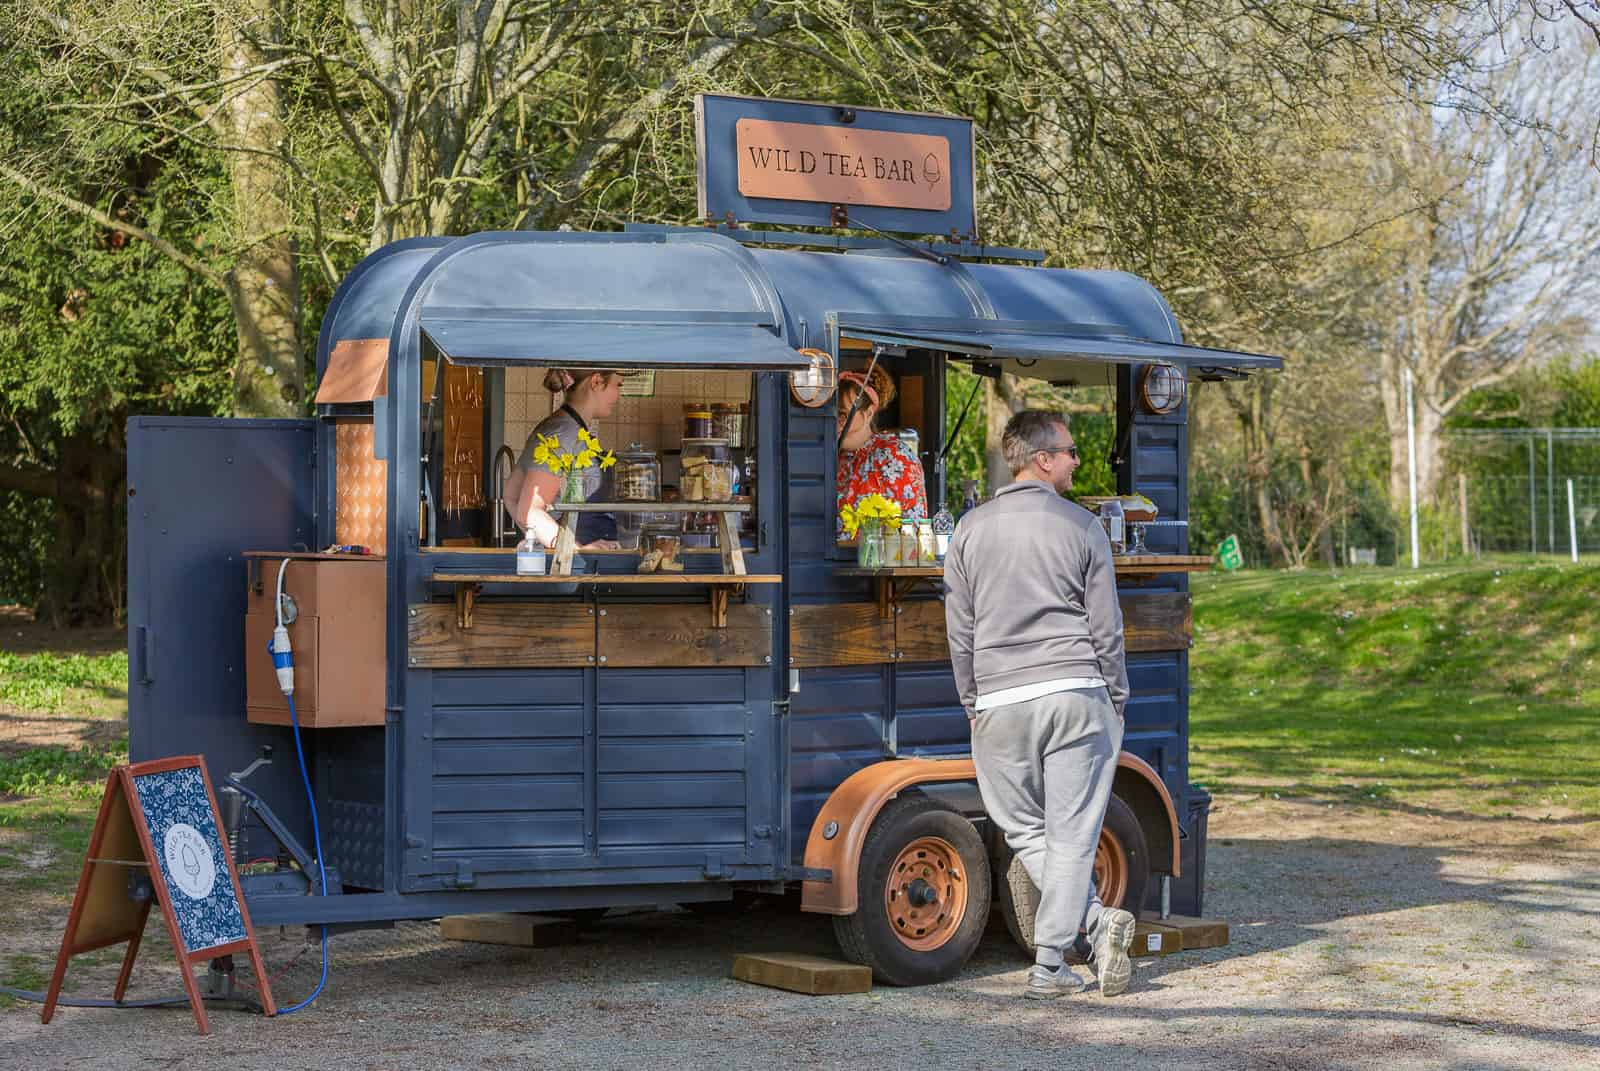 the wild tea bar horsebox with customer waiting to be served